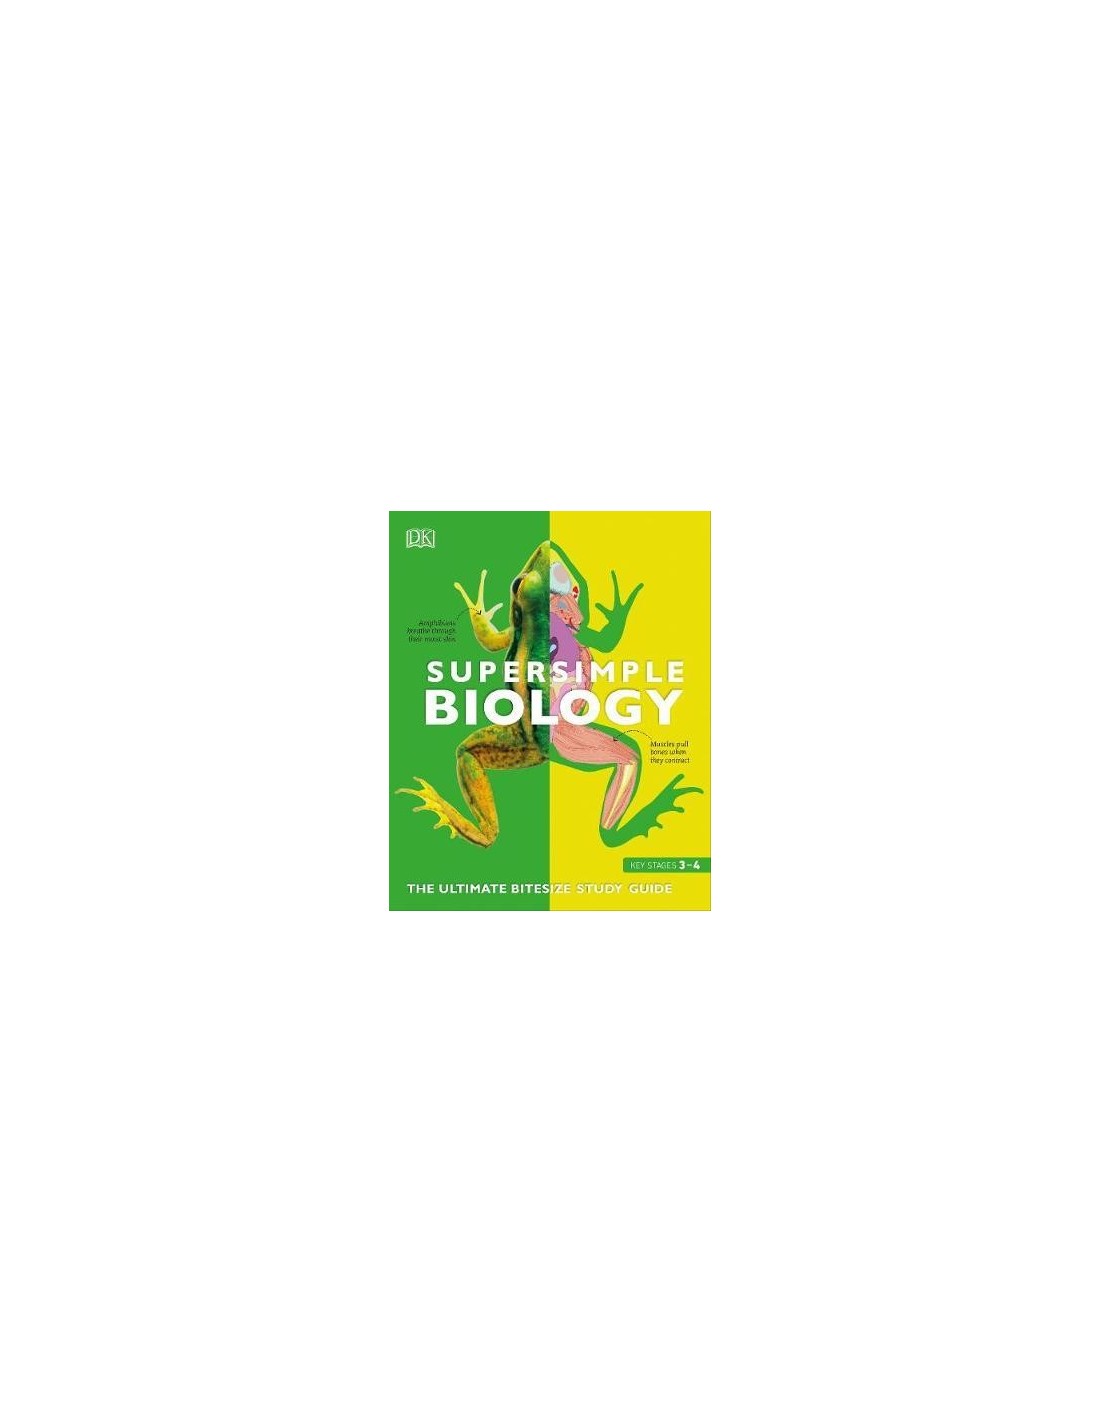 SuperSimple Biology : The Ultimate Bitesize Study Guide